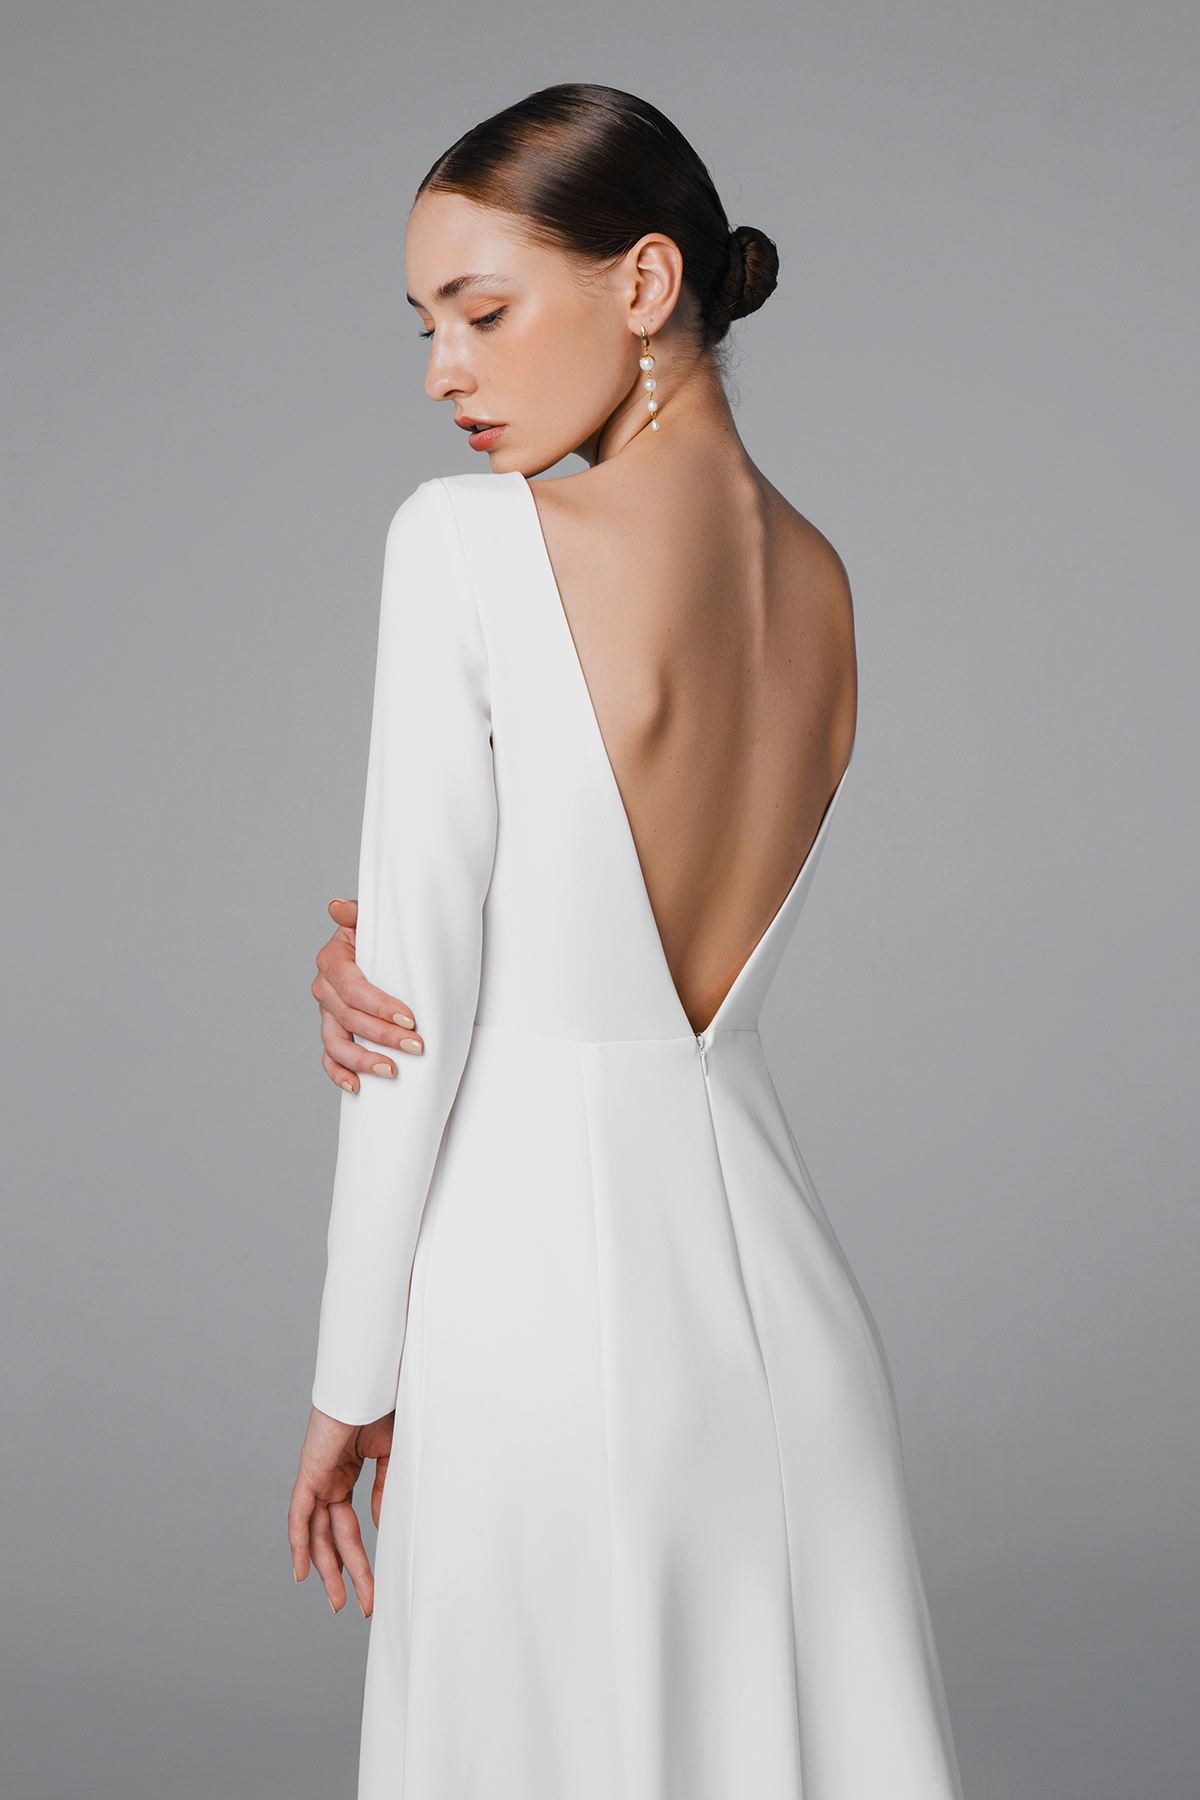 Fit and flare wedding dress with low back and long sleeves.